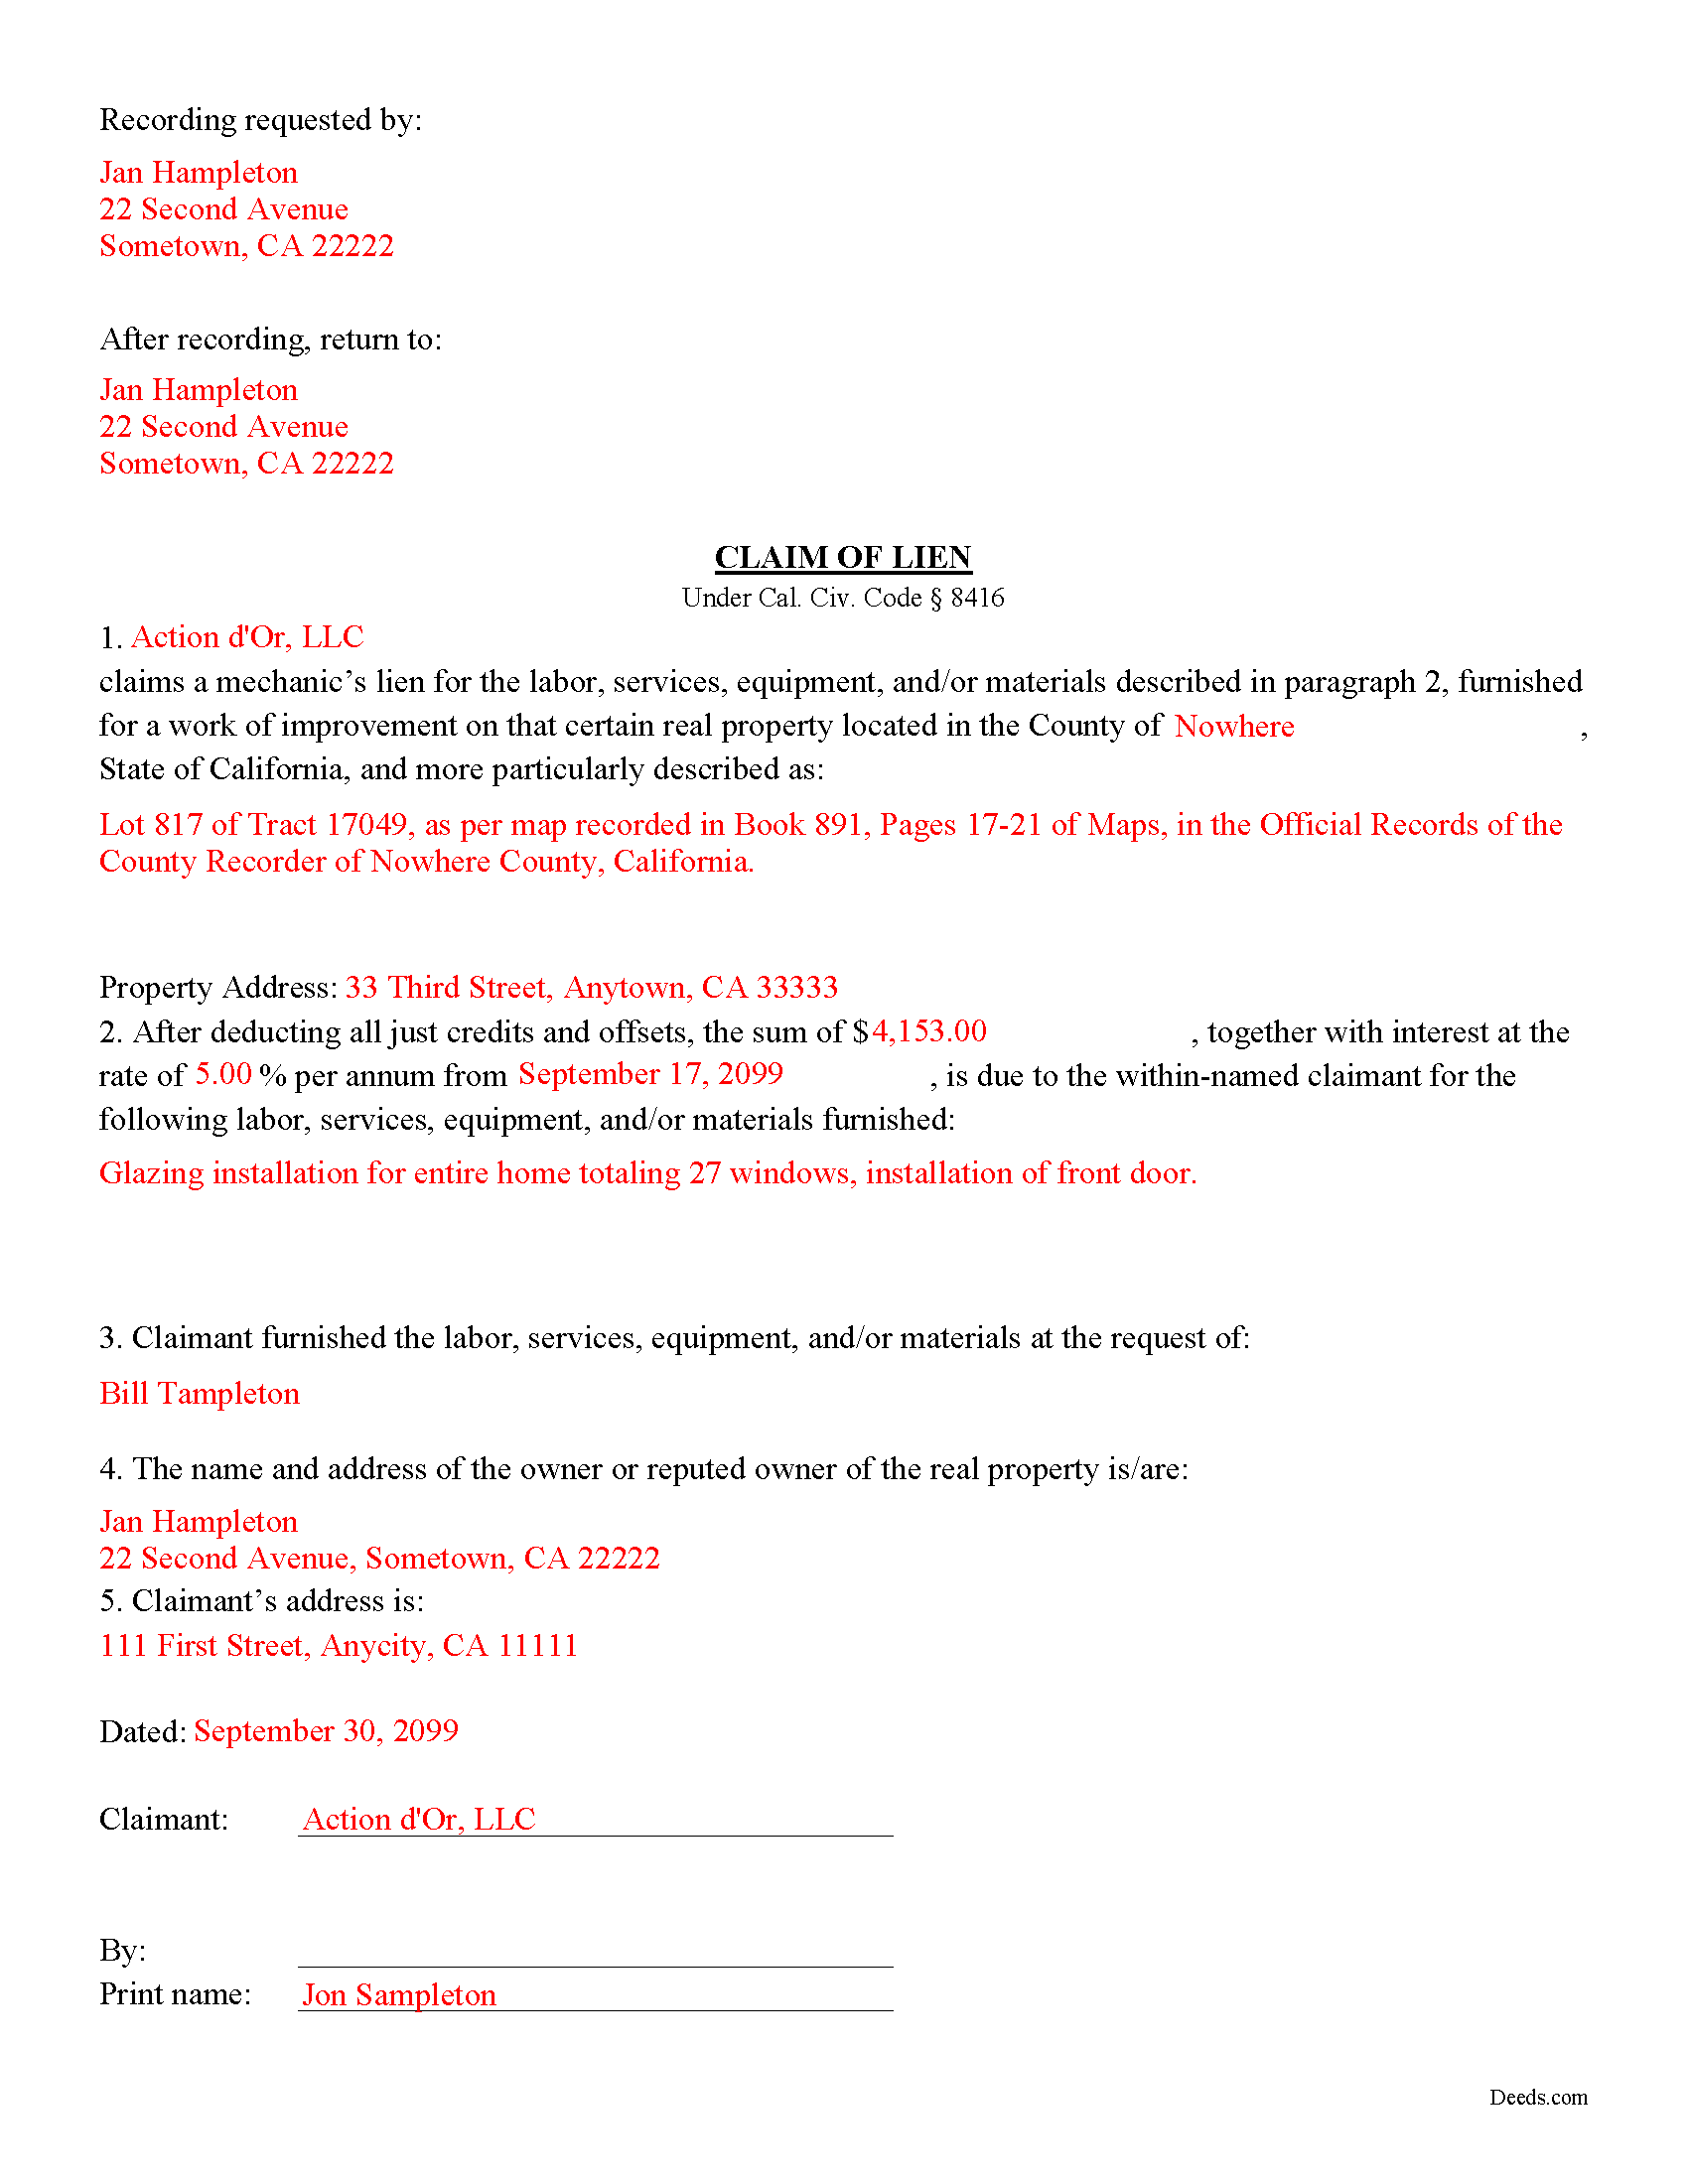 Completed Example of the Notice of Mechanics Lien Document